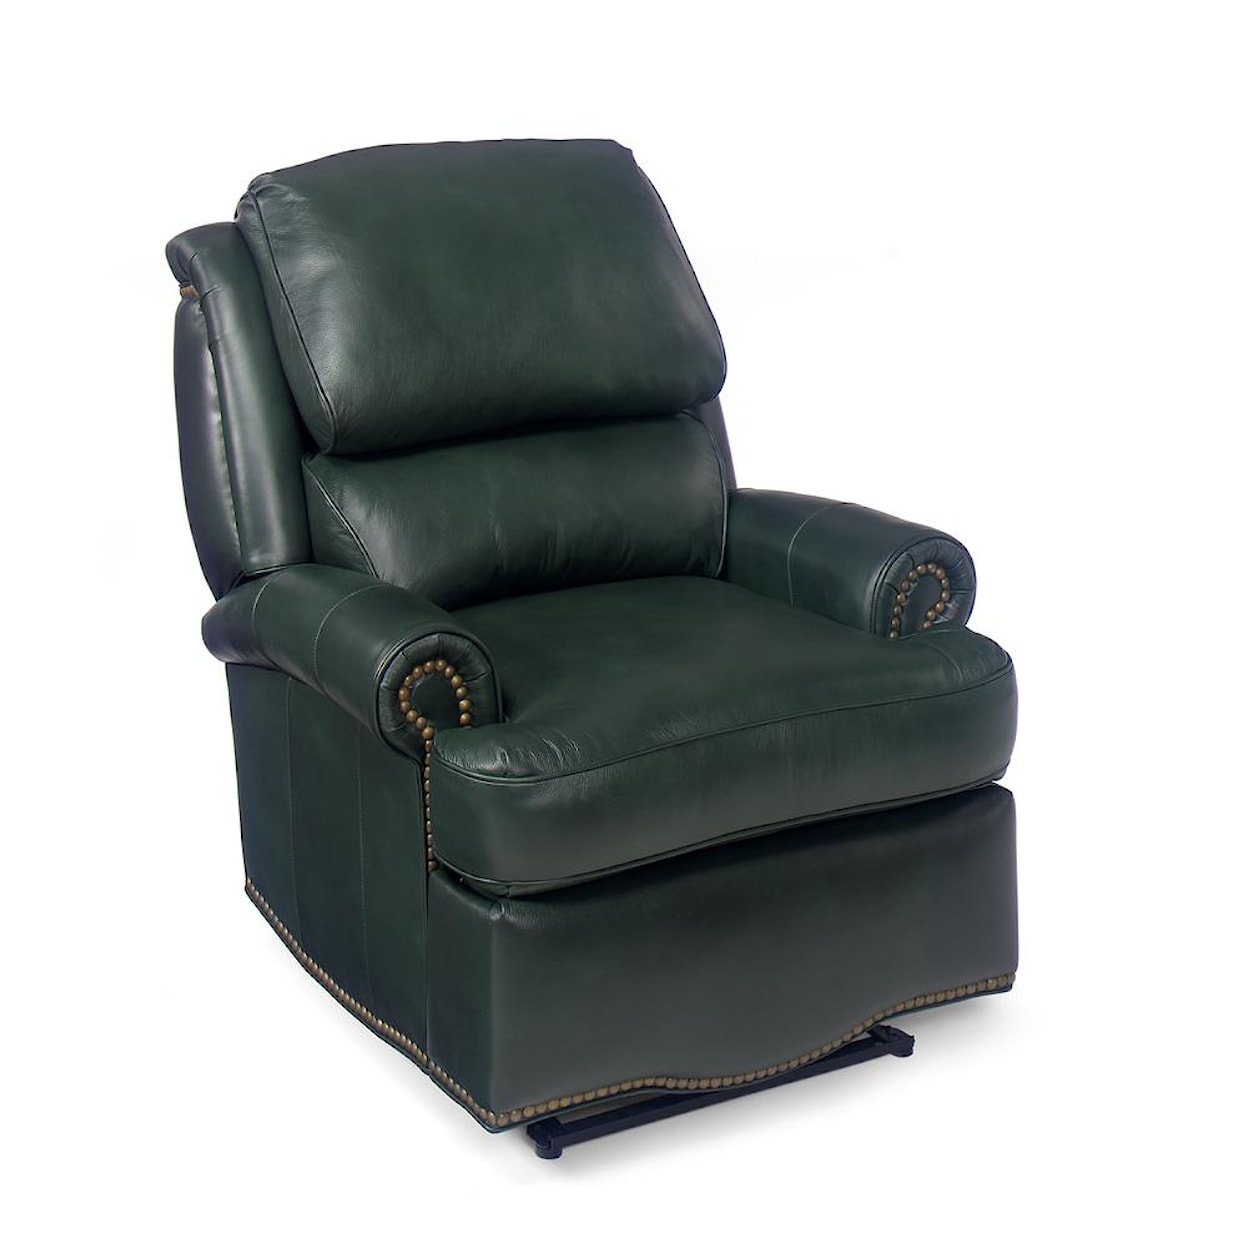 Bradington Young Chairs That Recline Swivel Glider Recliner